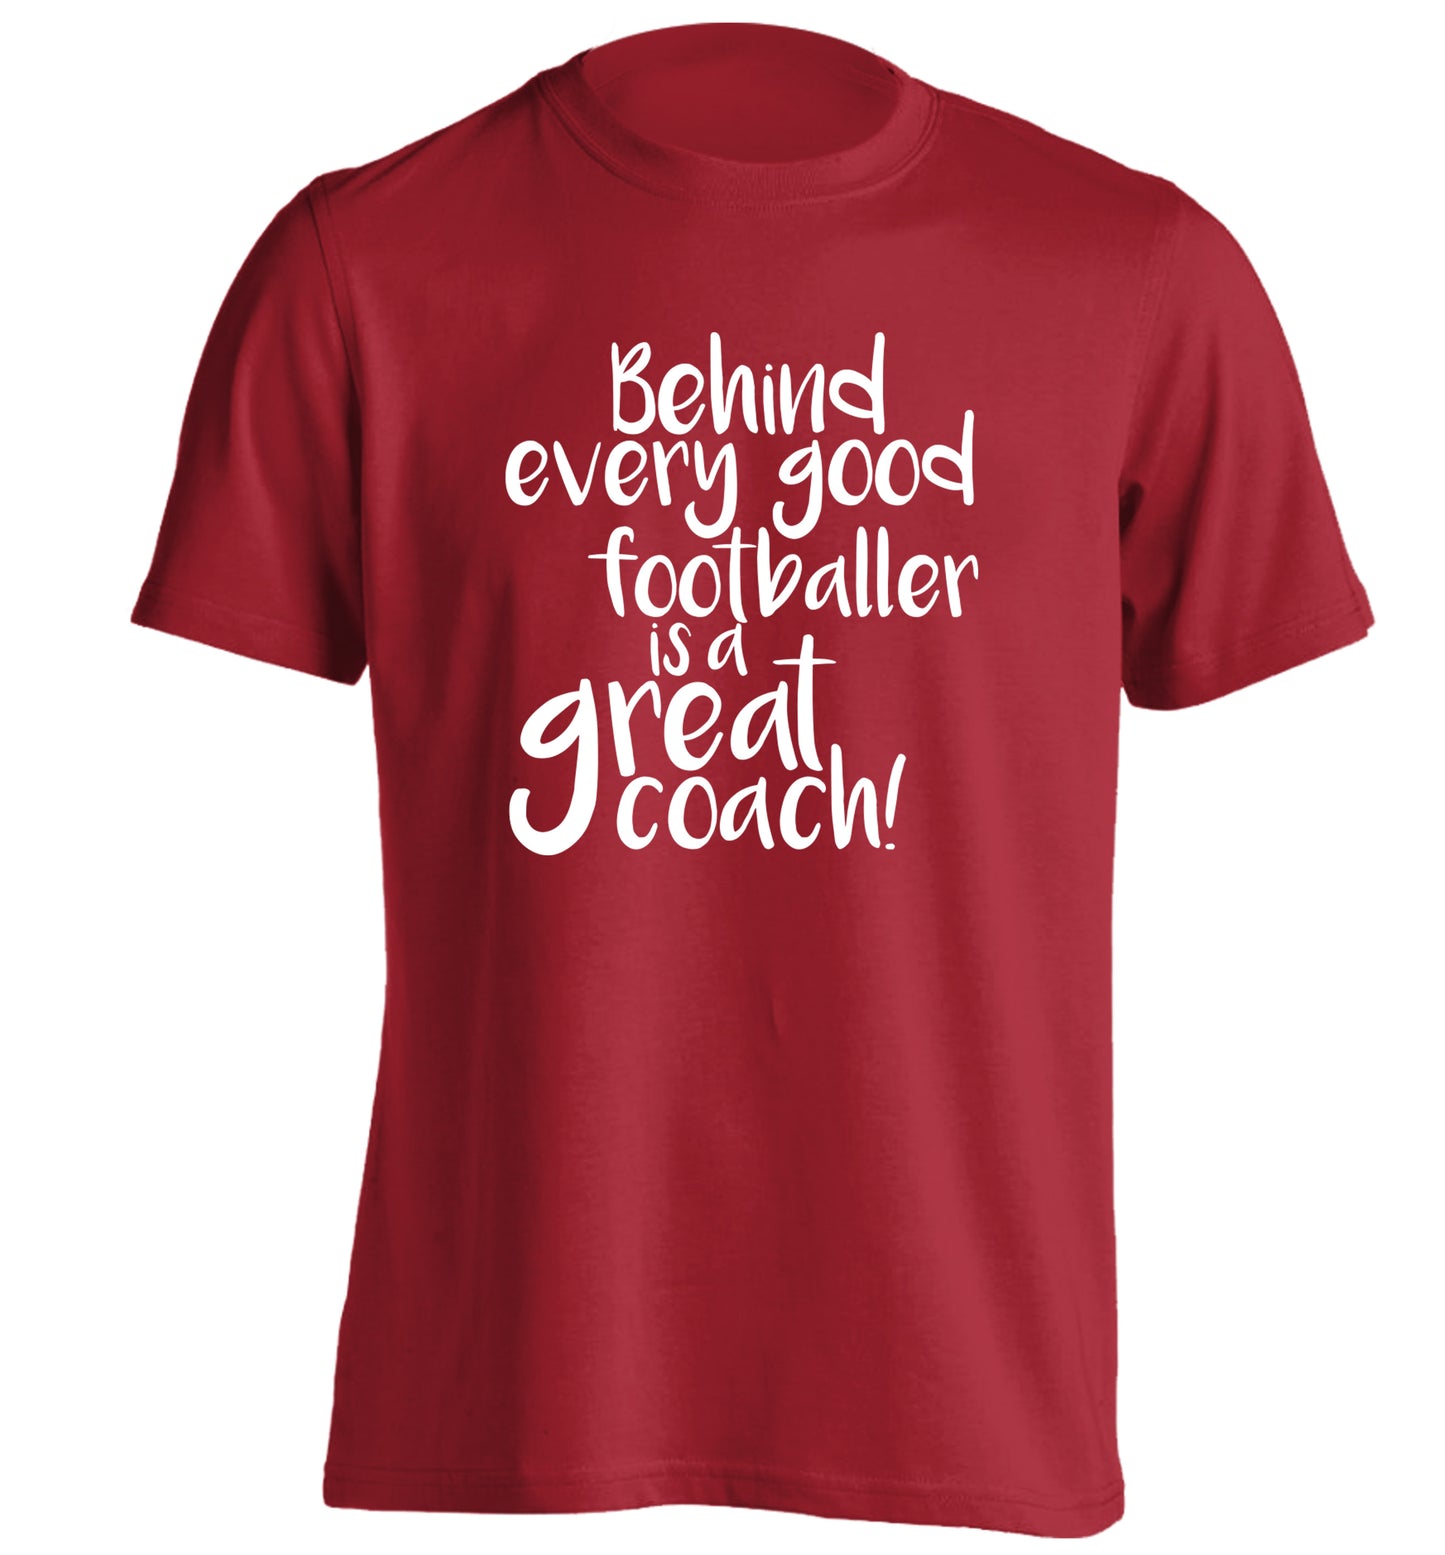 Behind every good footballer is a great coach! adults unisexred Tshirt 2XL